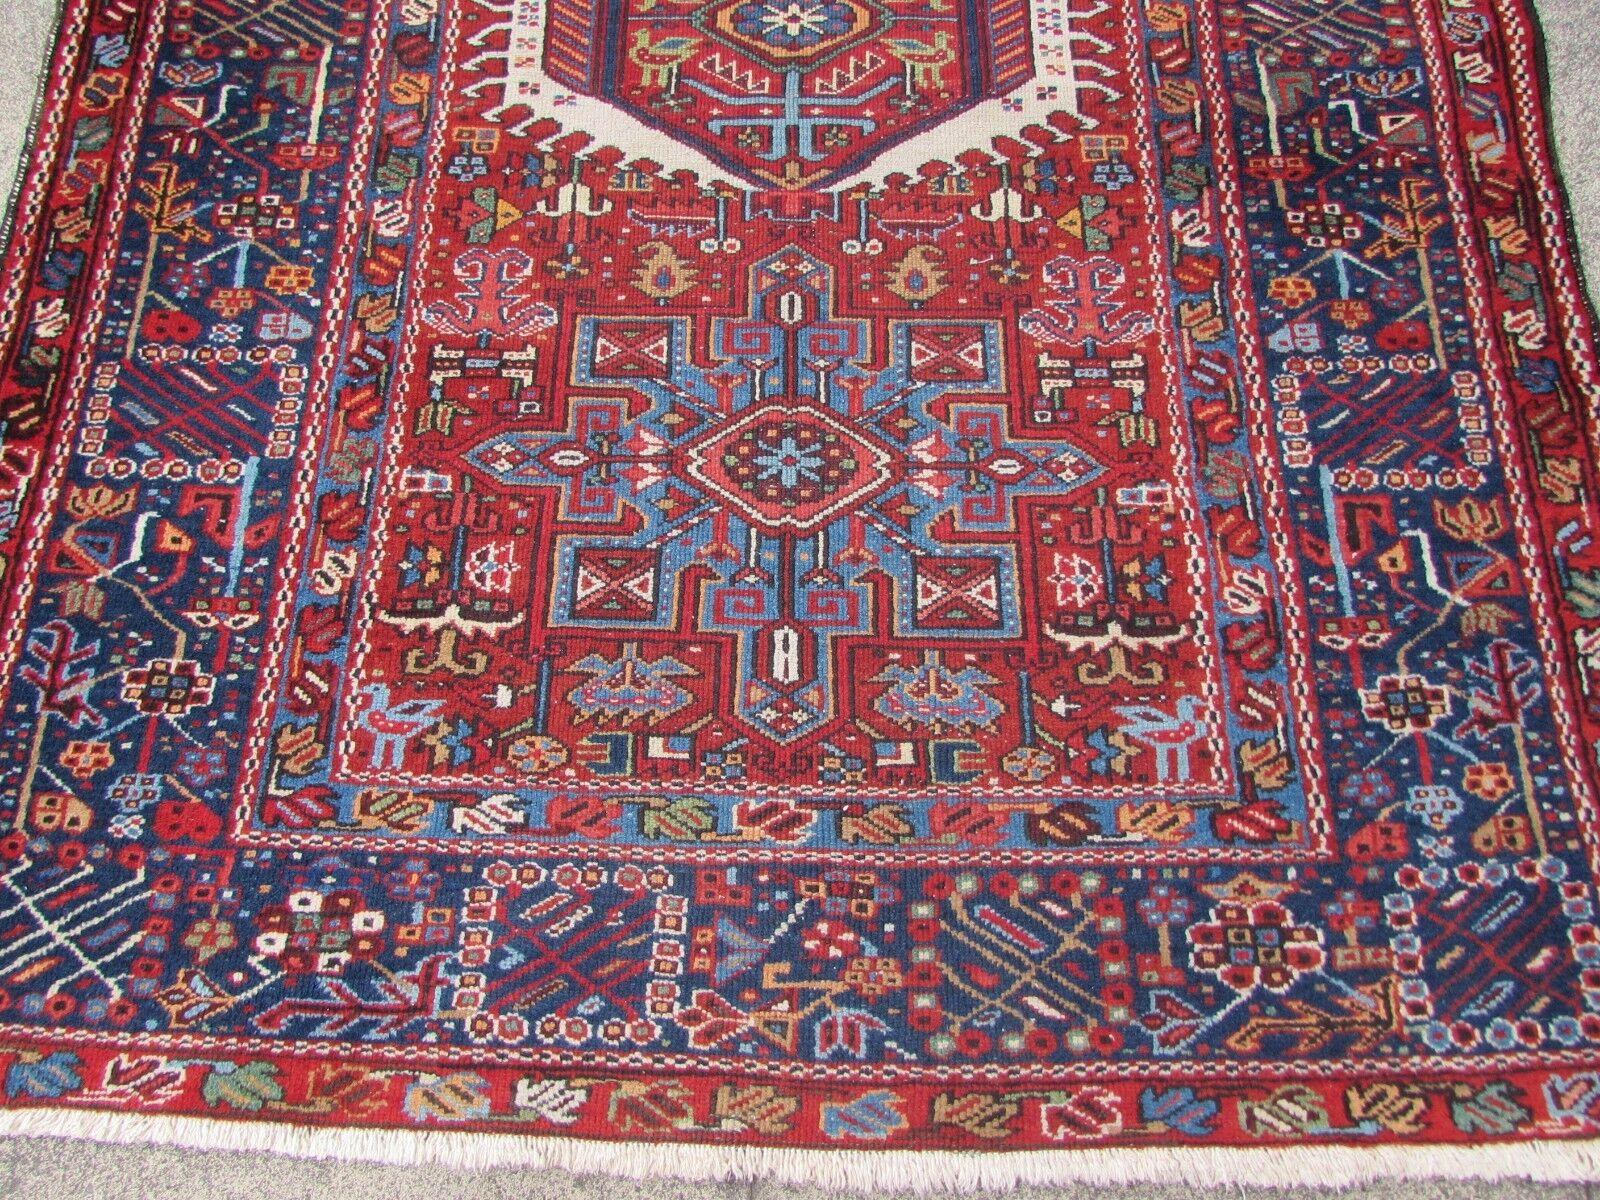 French  Handmade Antique Persian Style Karajeh Rug 4.6' x 6', 1920s - 1Q56 For Sale